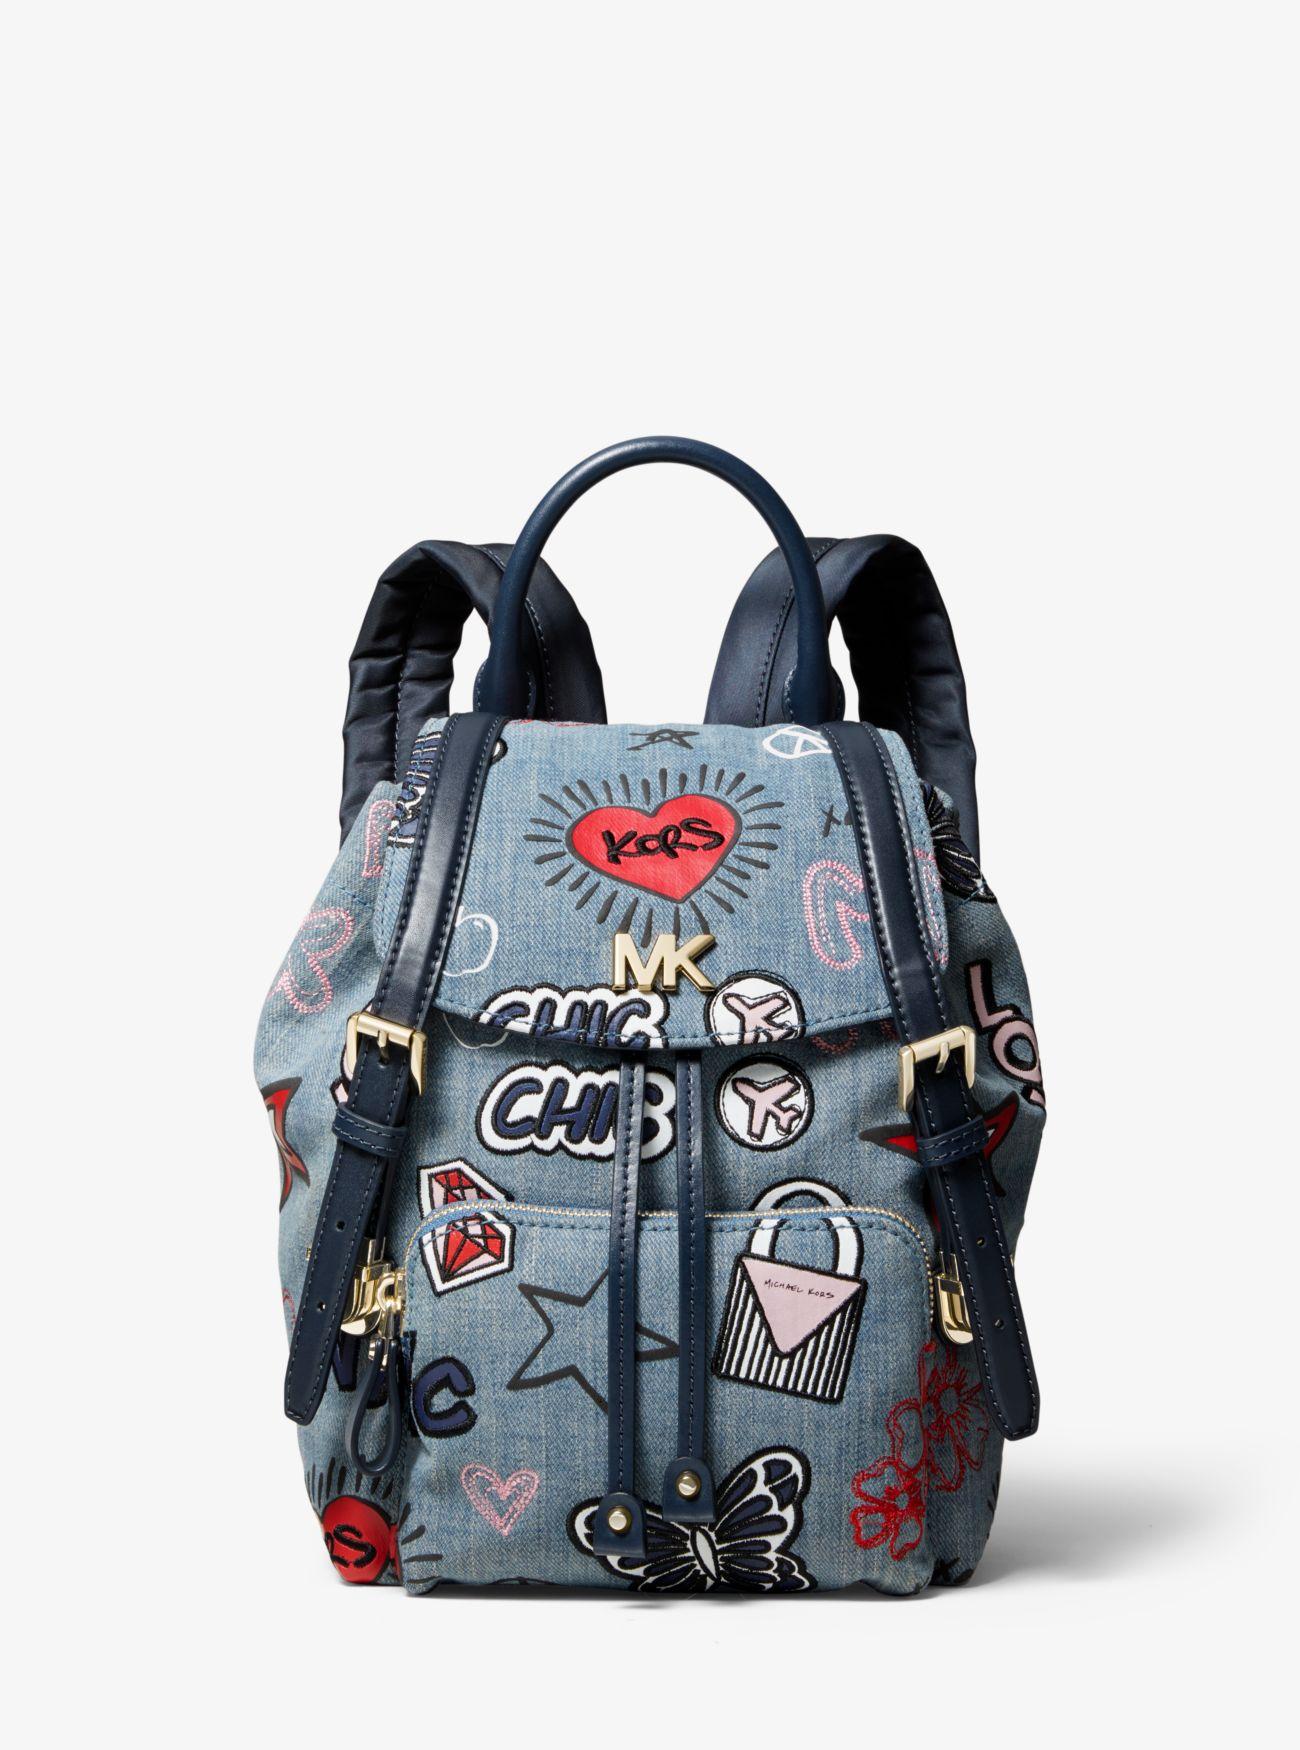 Michael Kors Beacon Small Embroidered Denim Backpack in Washed Denim ...